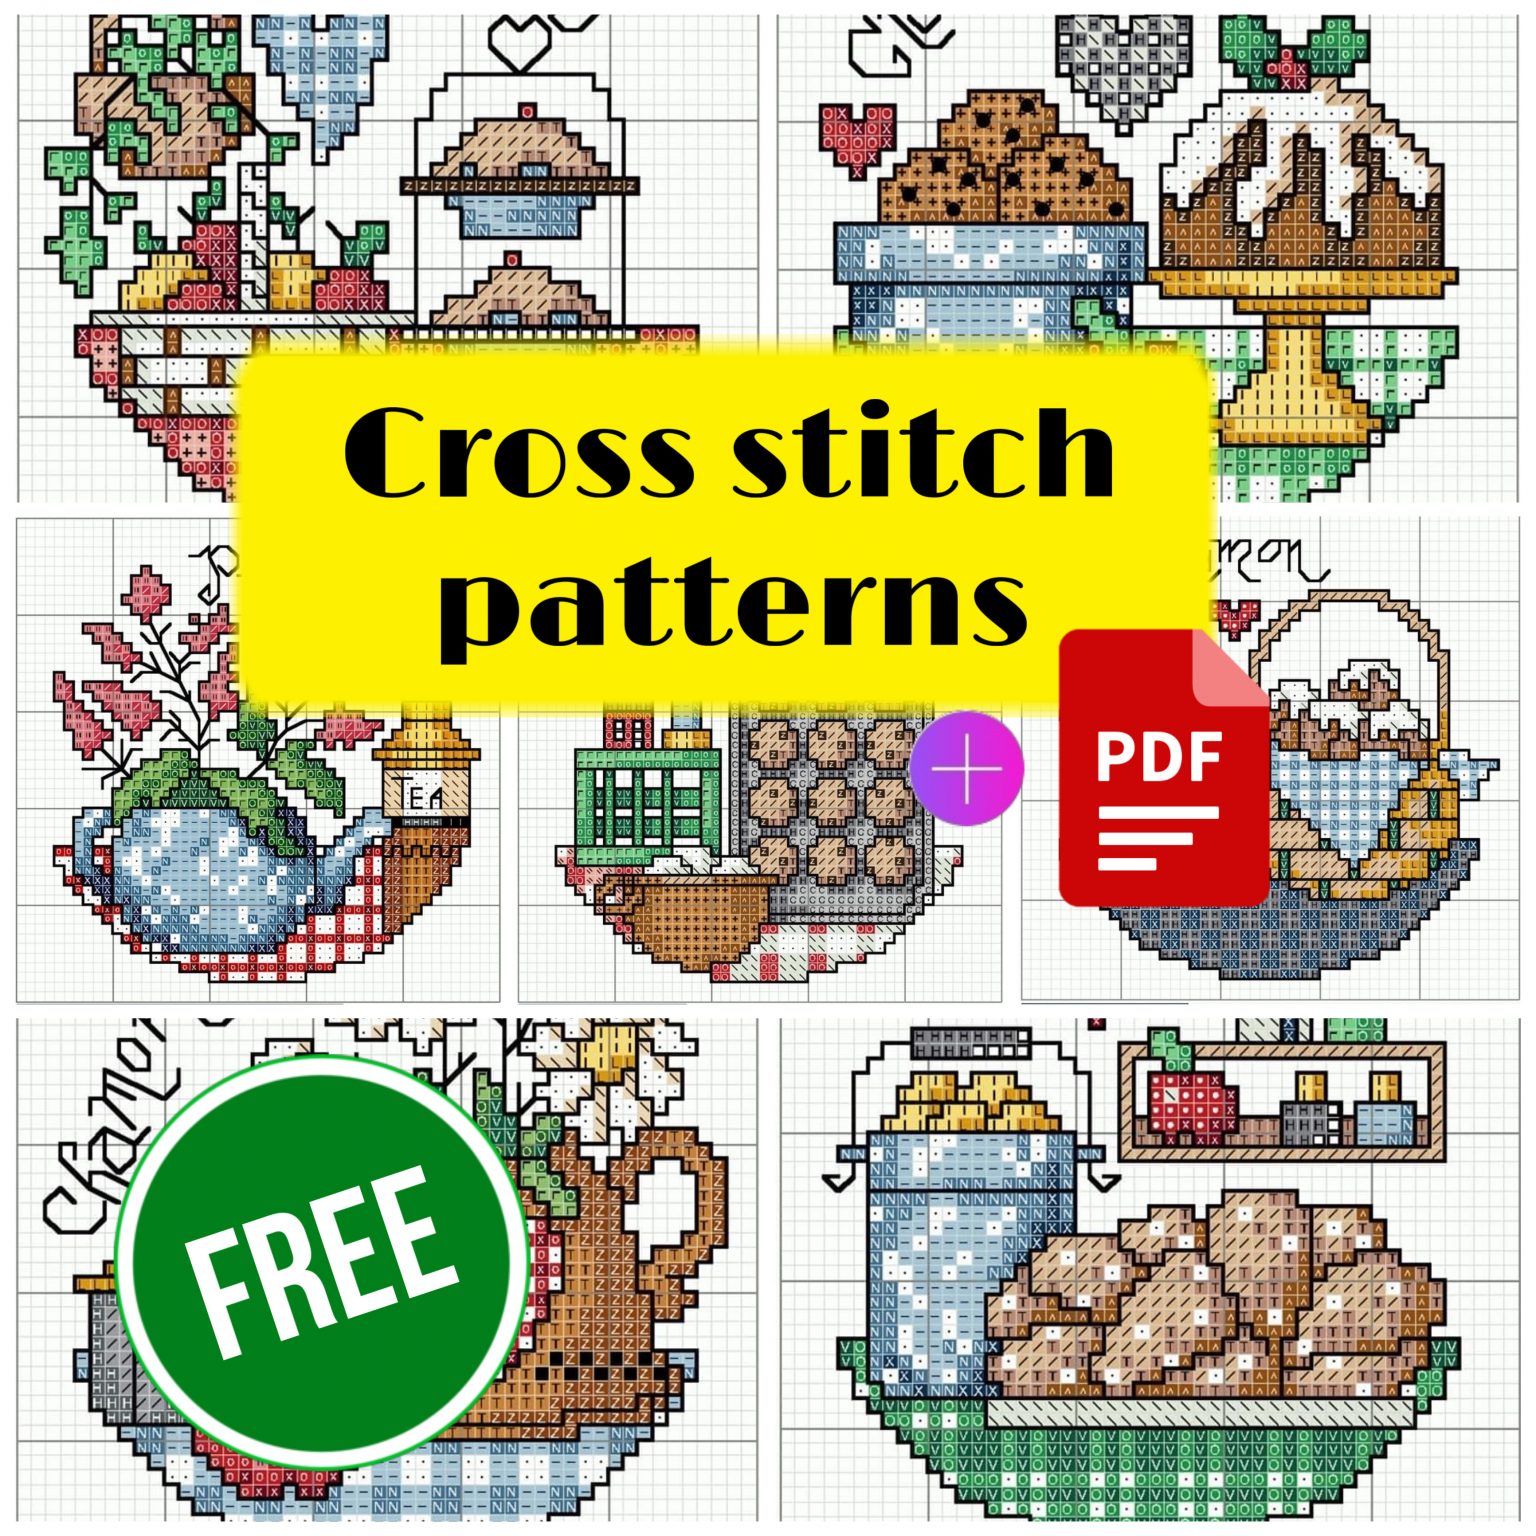 10-small-and-simple-cross-stitch-patterns-for-kitchen